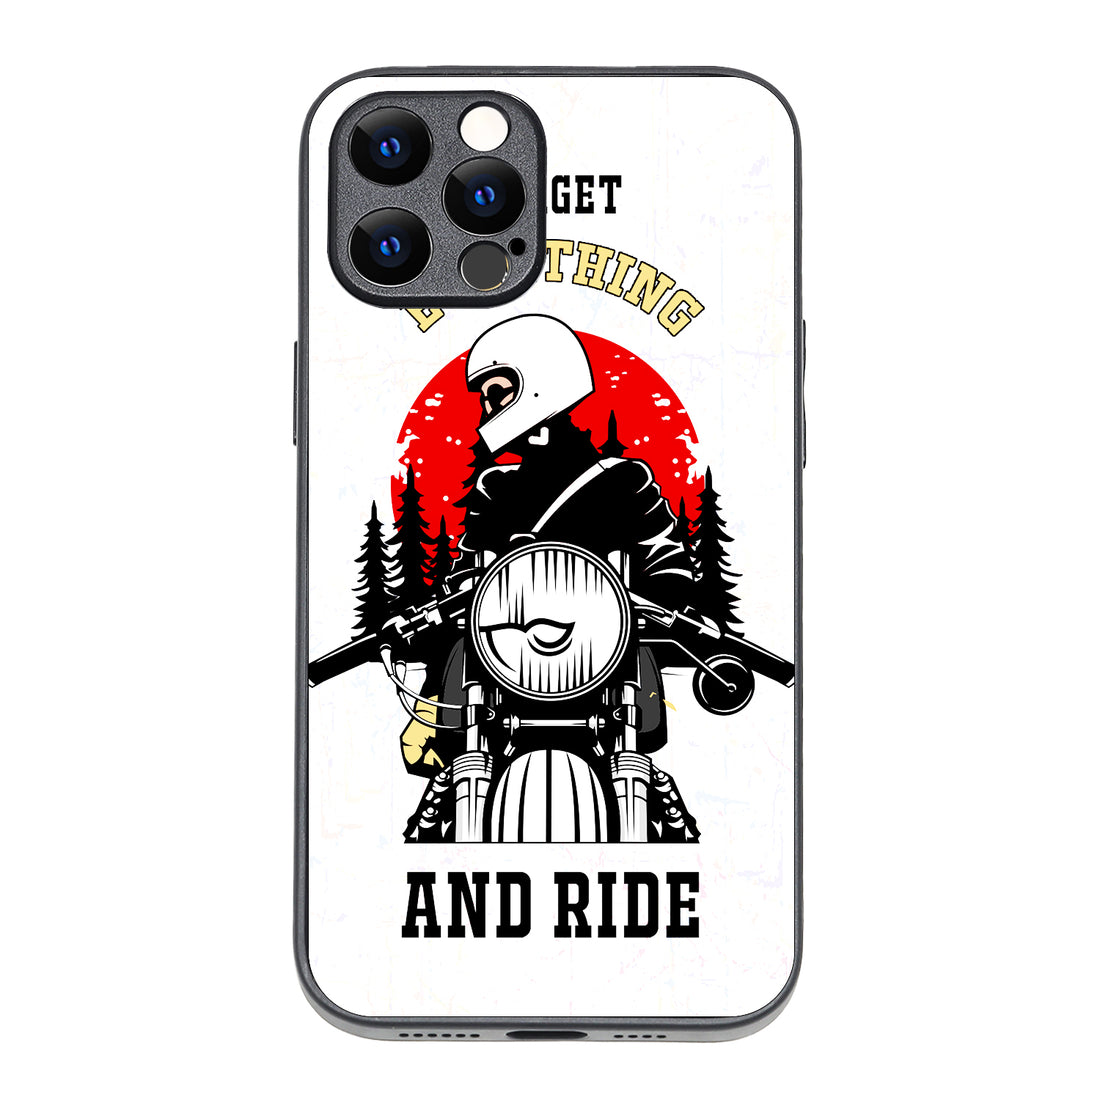 Forget Everything &amp; Ride Bike iPhone 12 Pro Max Case